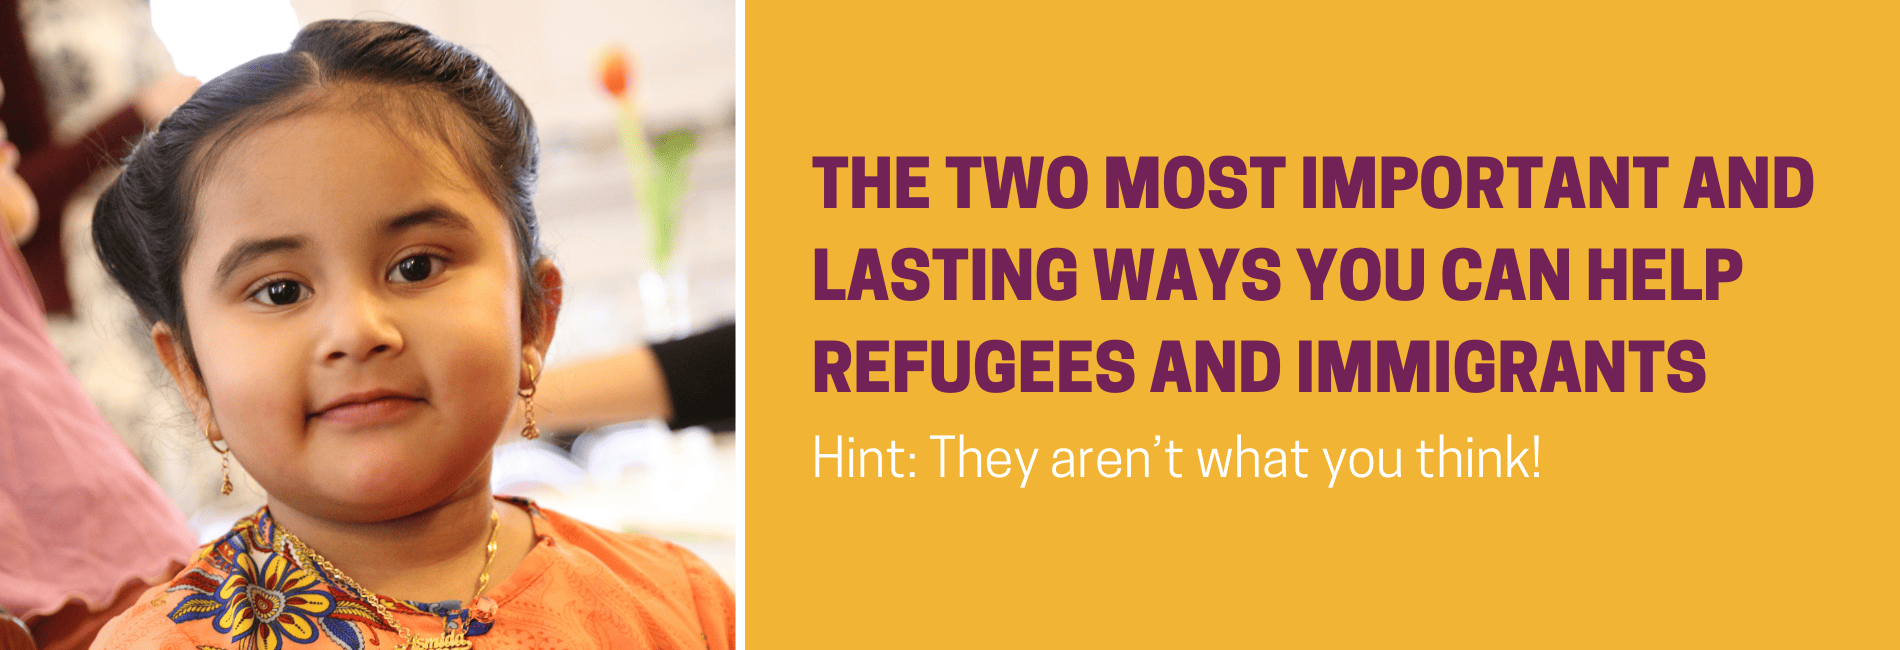 The Two Most Important and Lasting Ways You Can Help Refugees and Immigrants